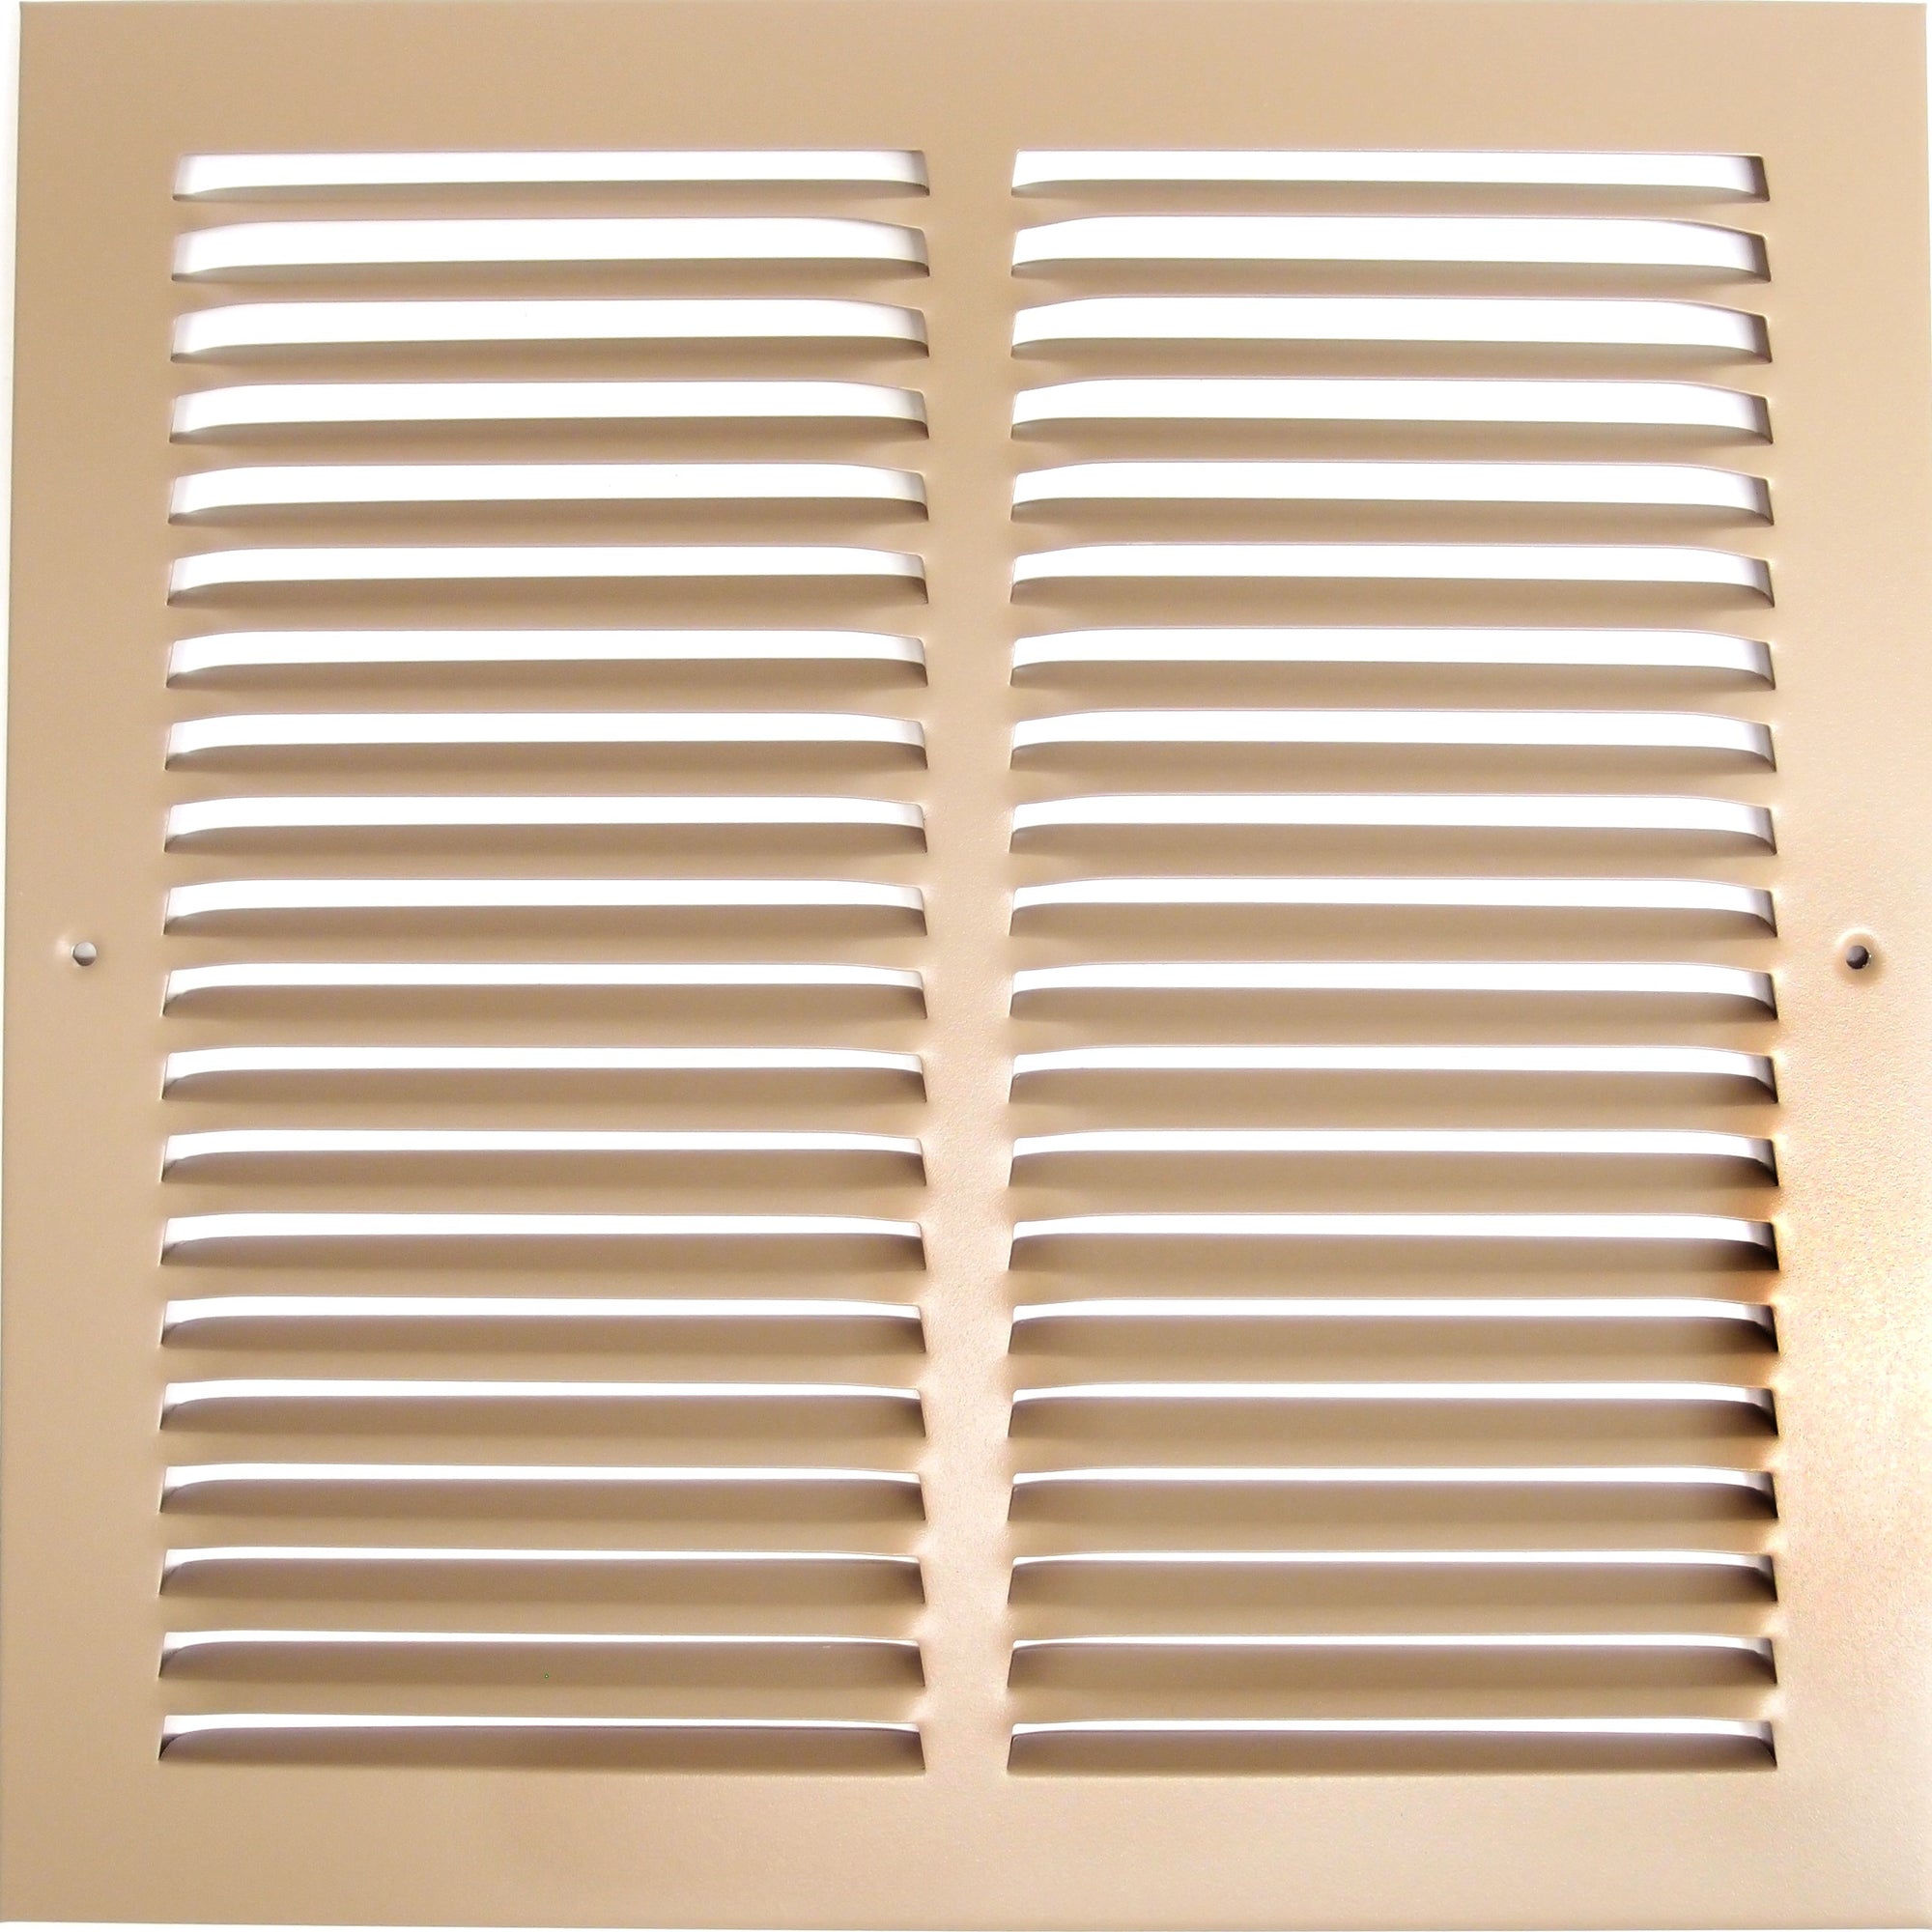 8" X 8" Air Vent Return Grilles - Sidewall and Ceiling - Steel